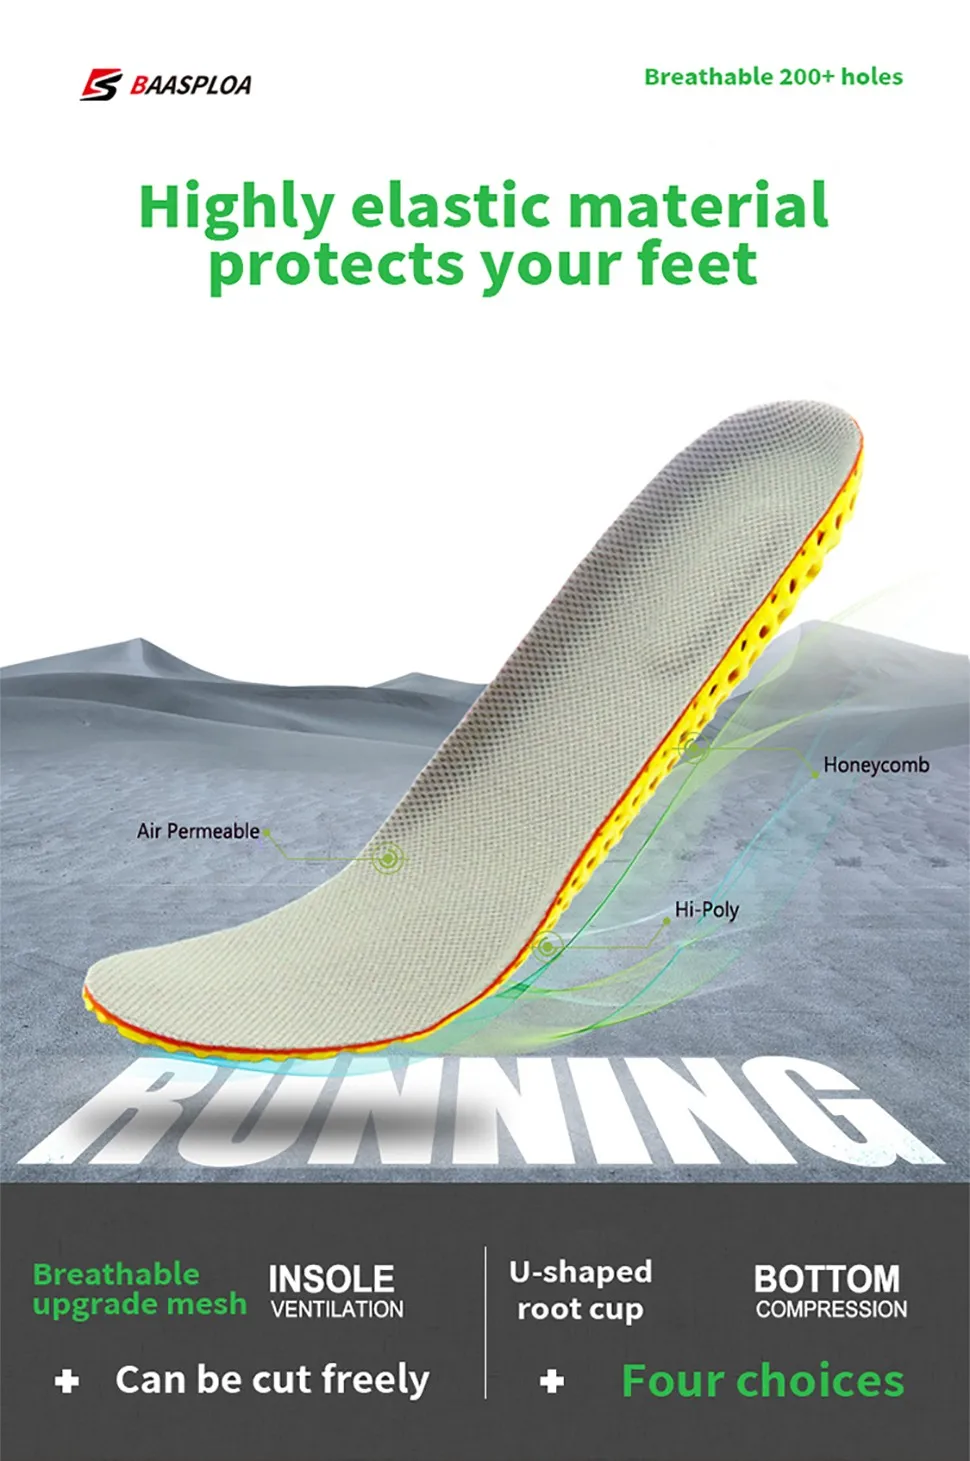 Sport Insoles Shoe Inserts Pad Soft Memory Foam Breathable Outdoor Running Silicone Gel Cushion Orthopedic Insoles EU 35-45 Size